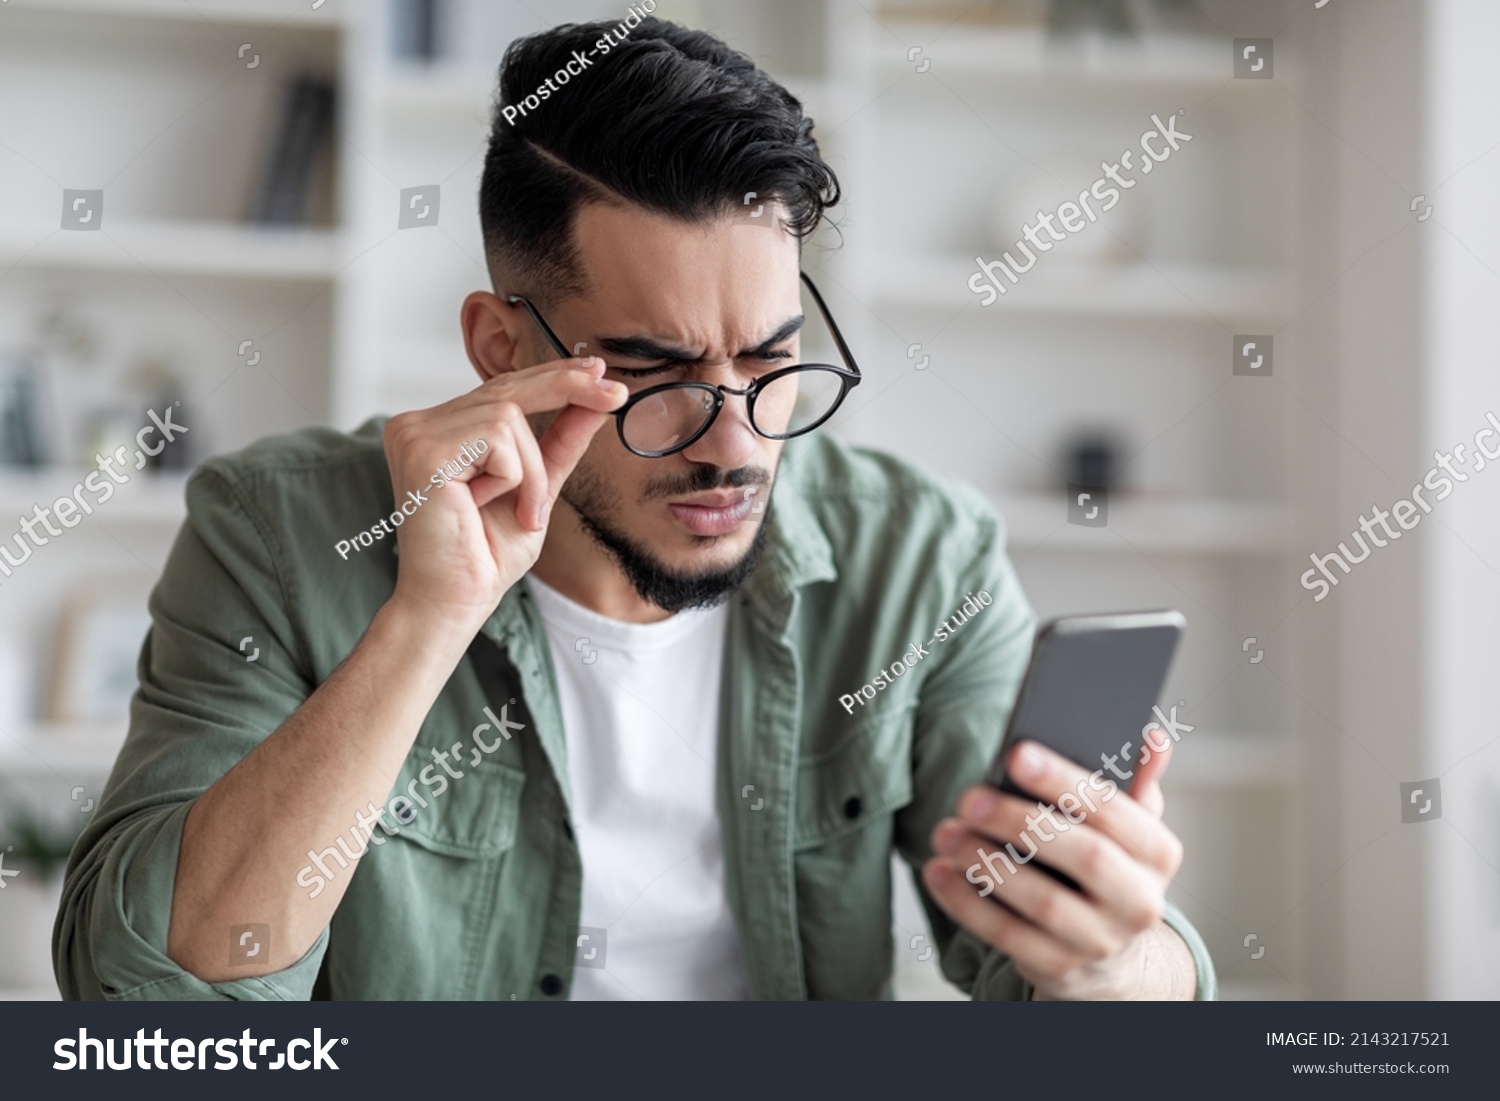 Eyesight Problems Concept. Young Arab Man In Eyeglasses Looking At Smartphone Screen And Frowning, Millennial Guy Trying To Read Message, Suffering From Astigmatism And Bad Vision, Closeup Shot #2143217521